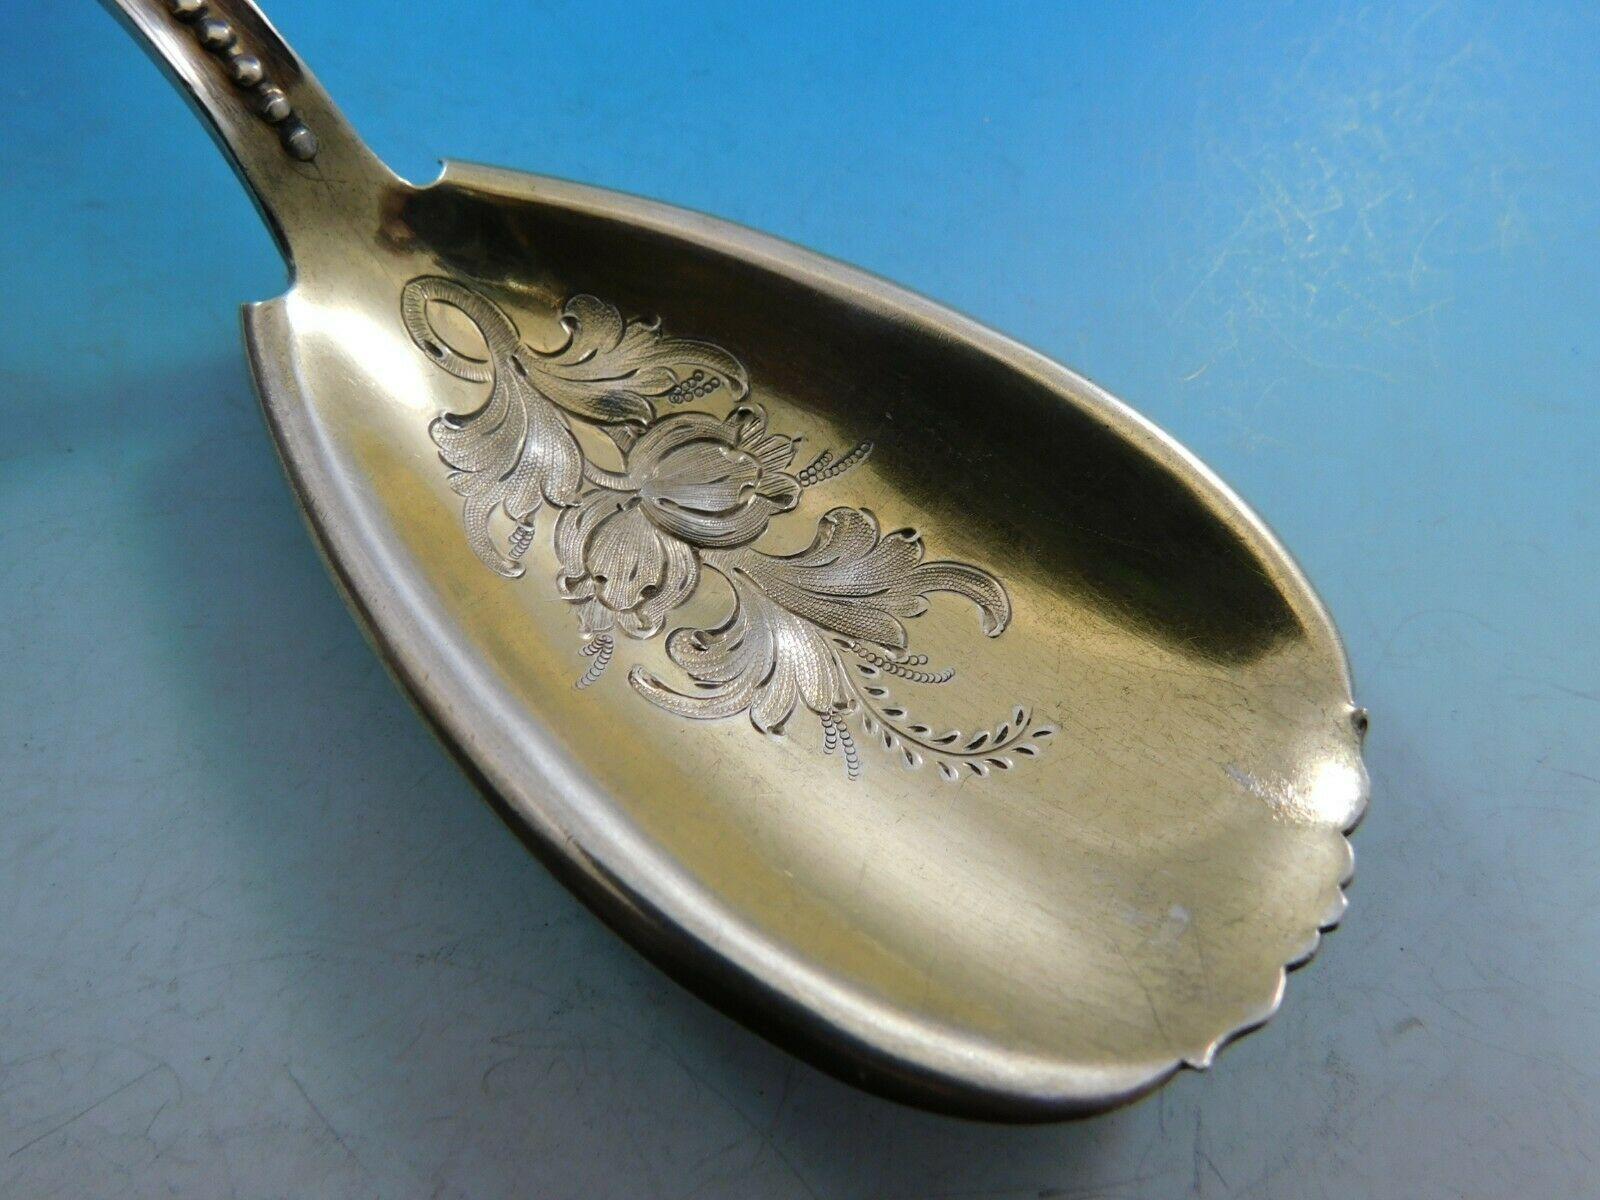 Medallion aka Warrior by Wood & Hughes

Extraordinary sterling silver berry spoon measuring 8 5/8